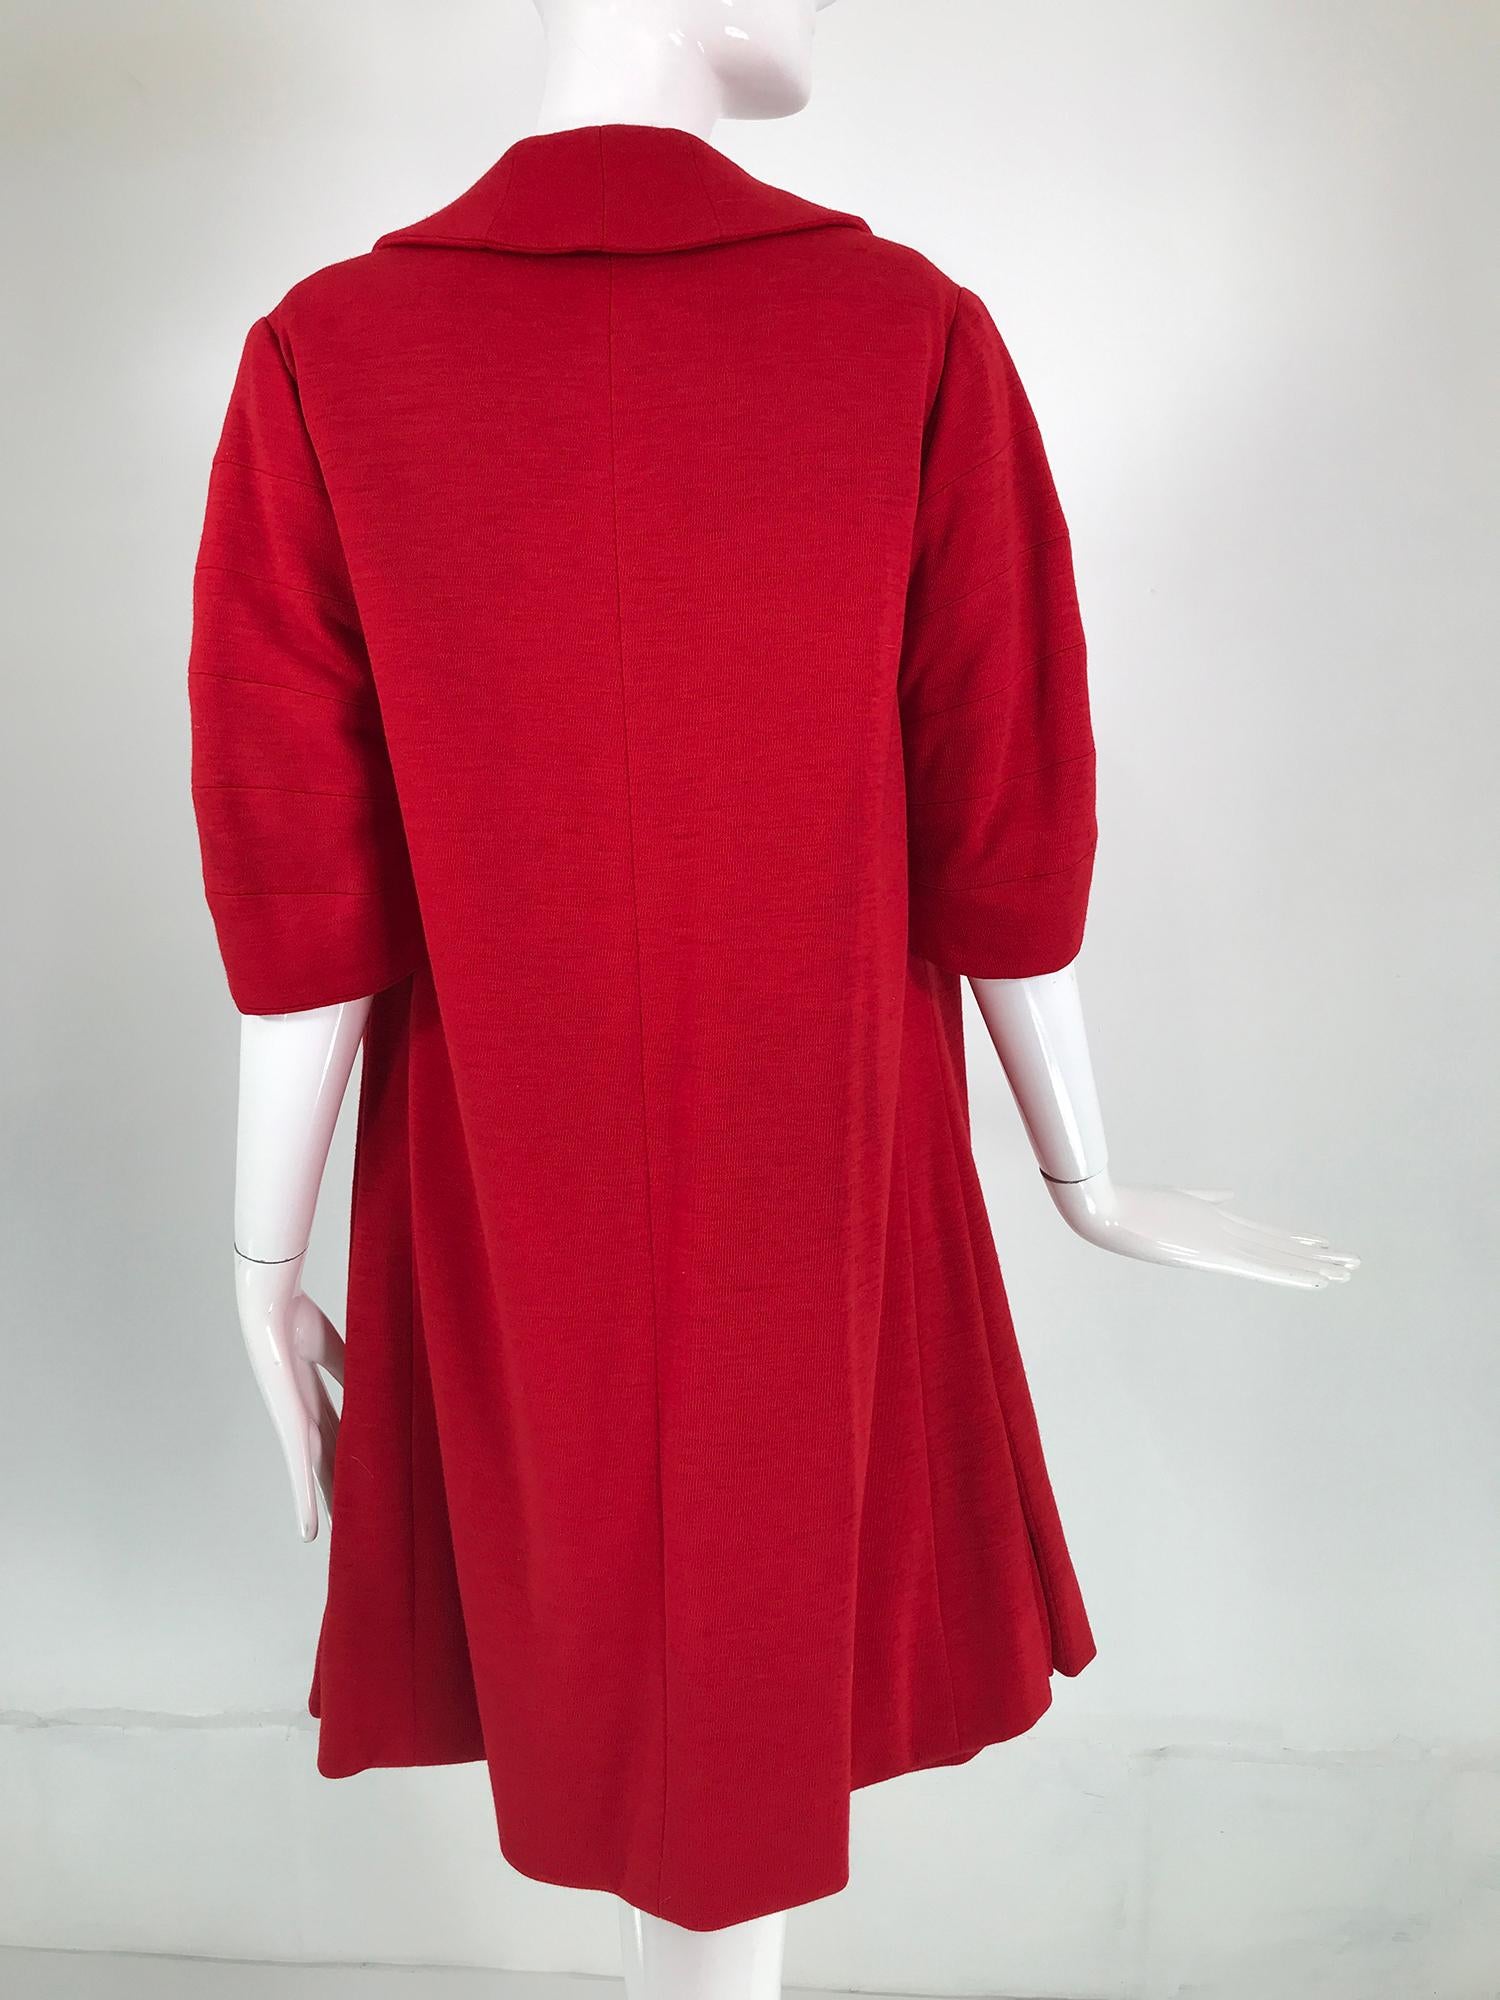 Coco Chanel Red Haute Couture 1950s 2 pc Wool Jersey Jewel Button Dress & Coat  In Good Condition For Sale In West Palm Beach, FL